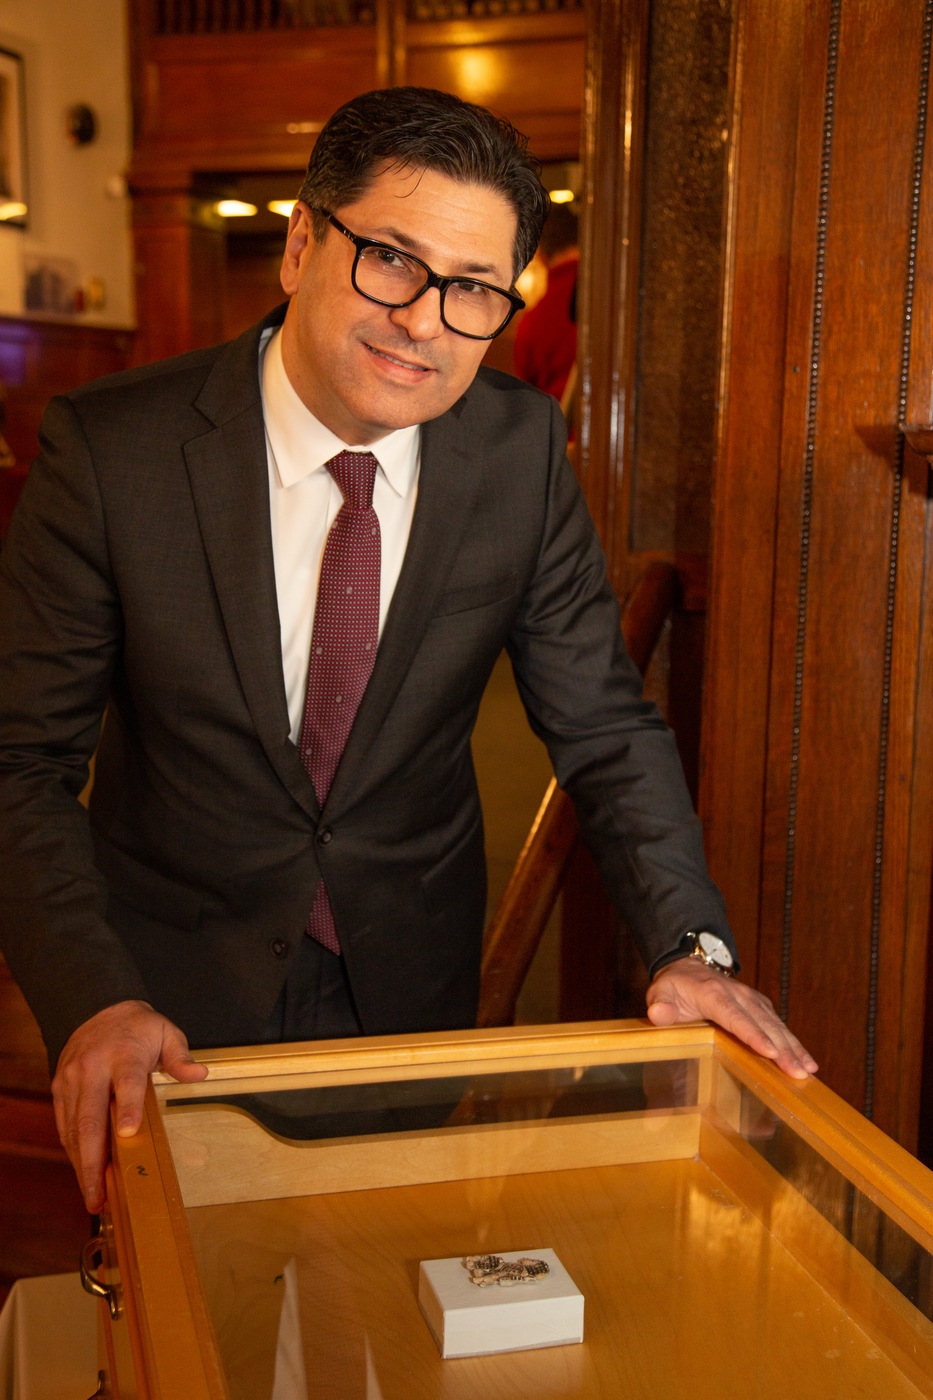 Silwan Sinarjee, the chargé d'affaires at the Embassy of the Republic of Iraq, with the artifact the FBI returned during a ceremony at the Iraq Embassy on march 8, 2023.